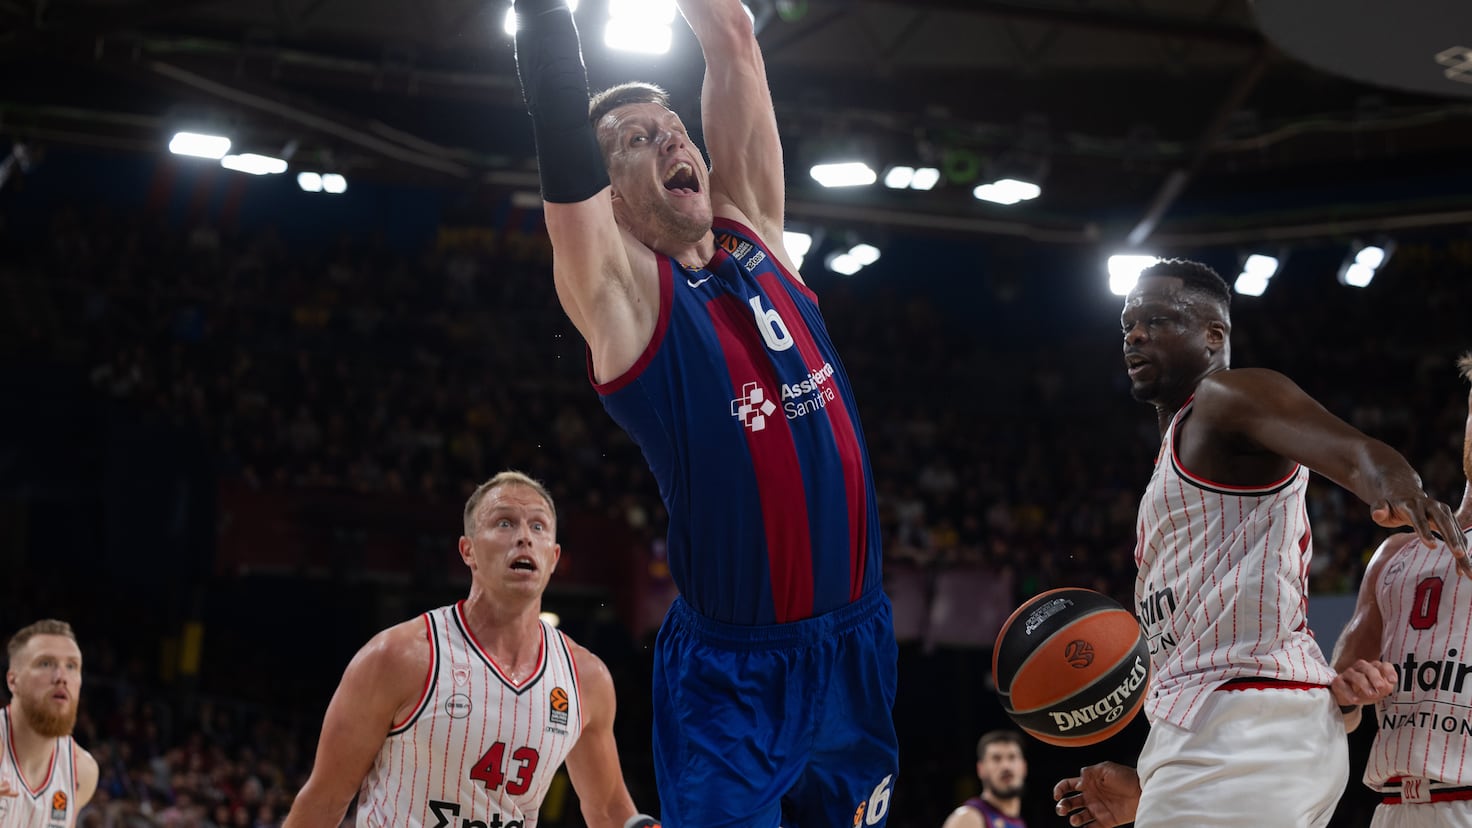 Barcelona Battles for Top Seed Position Amidst Euroliga Distractions and Injuries